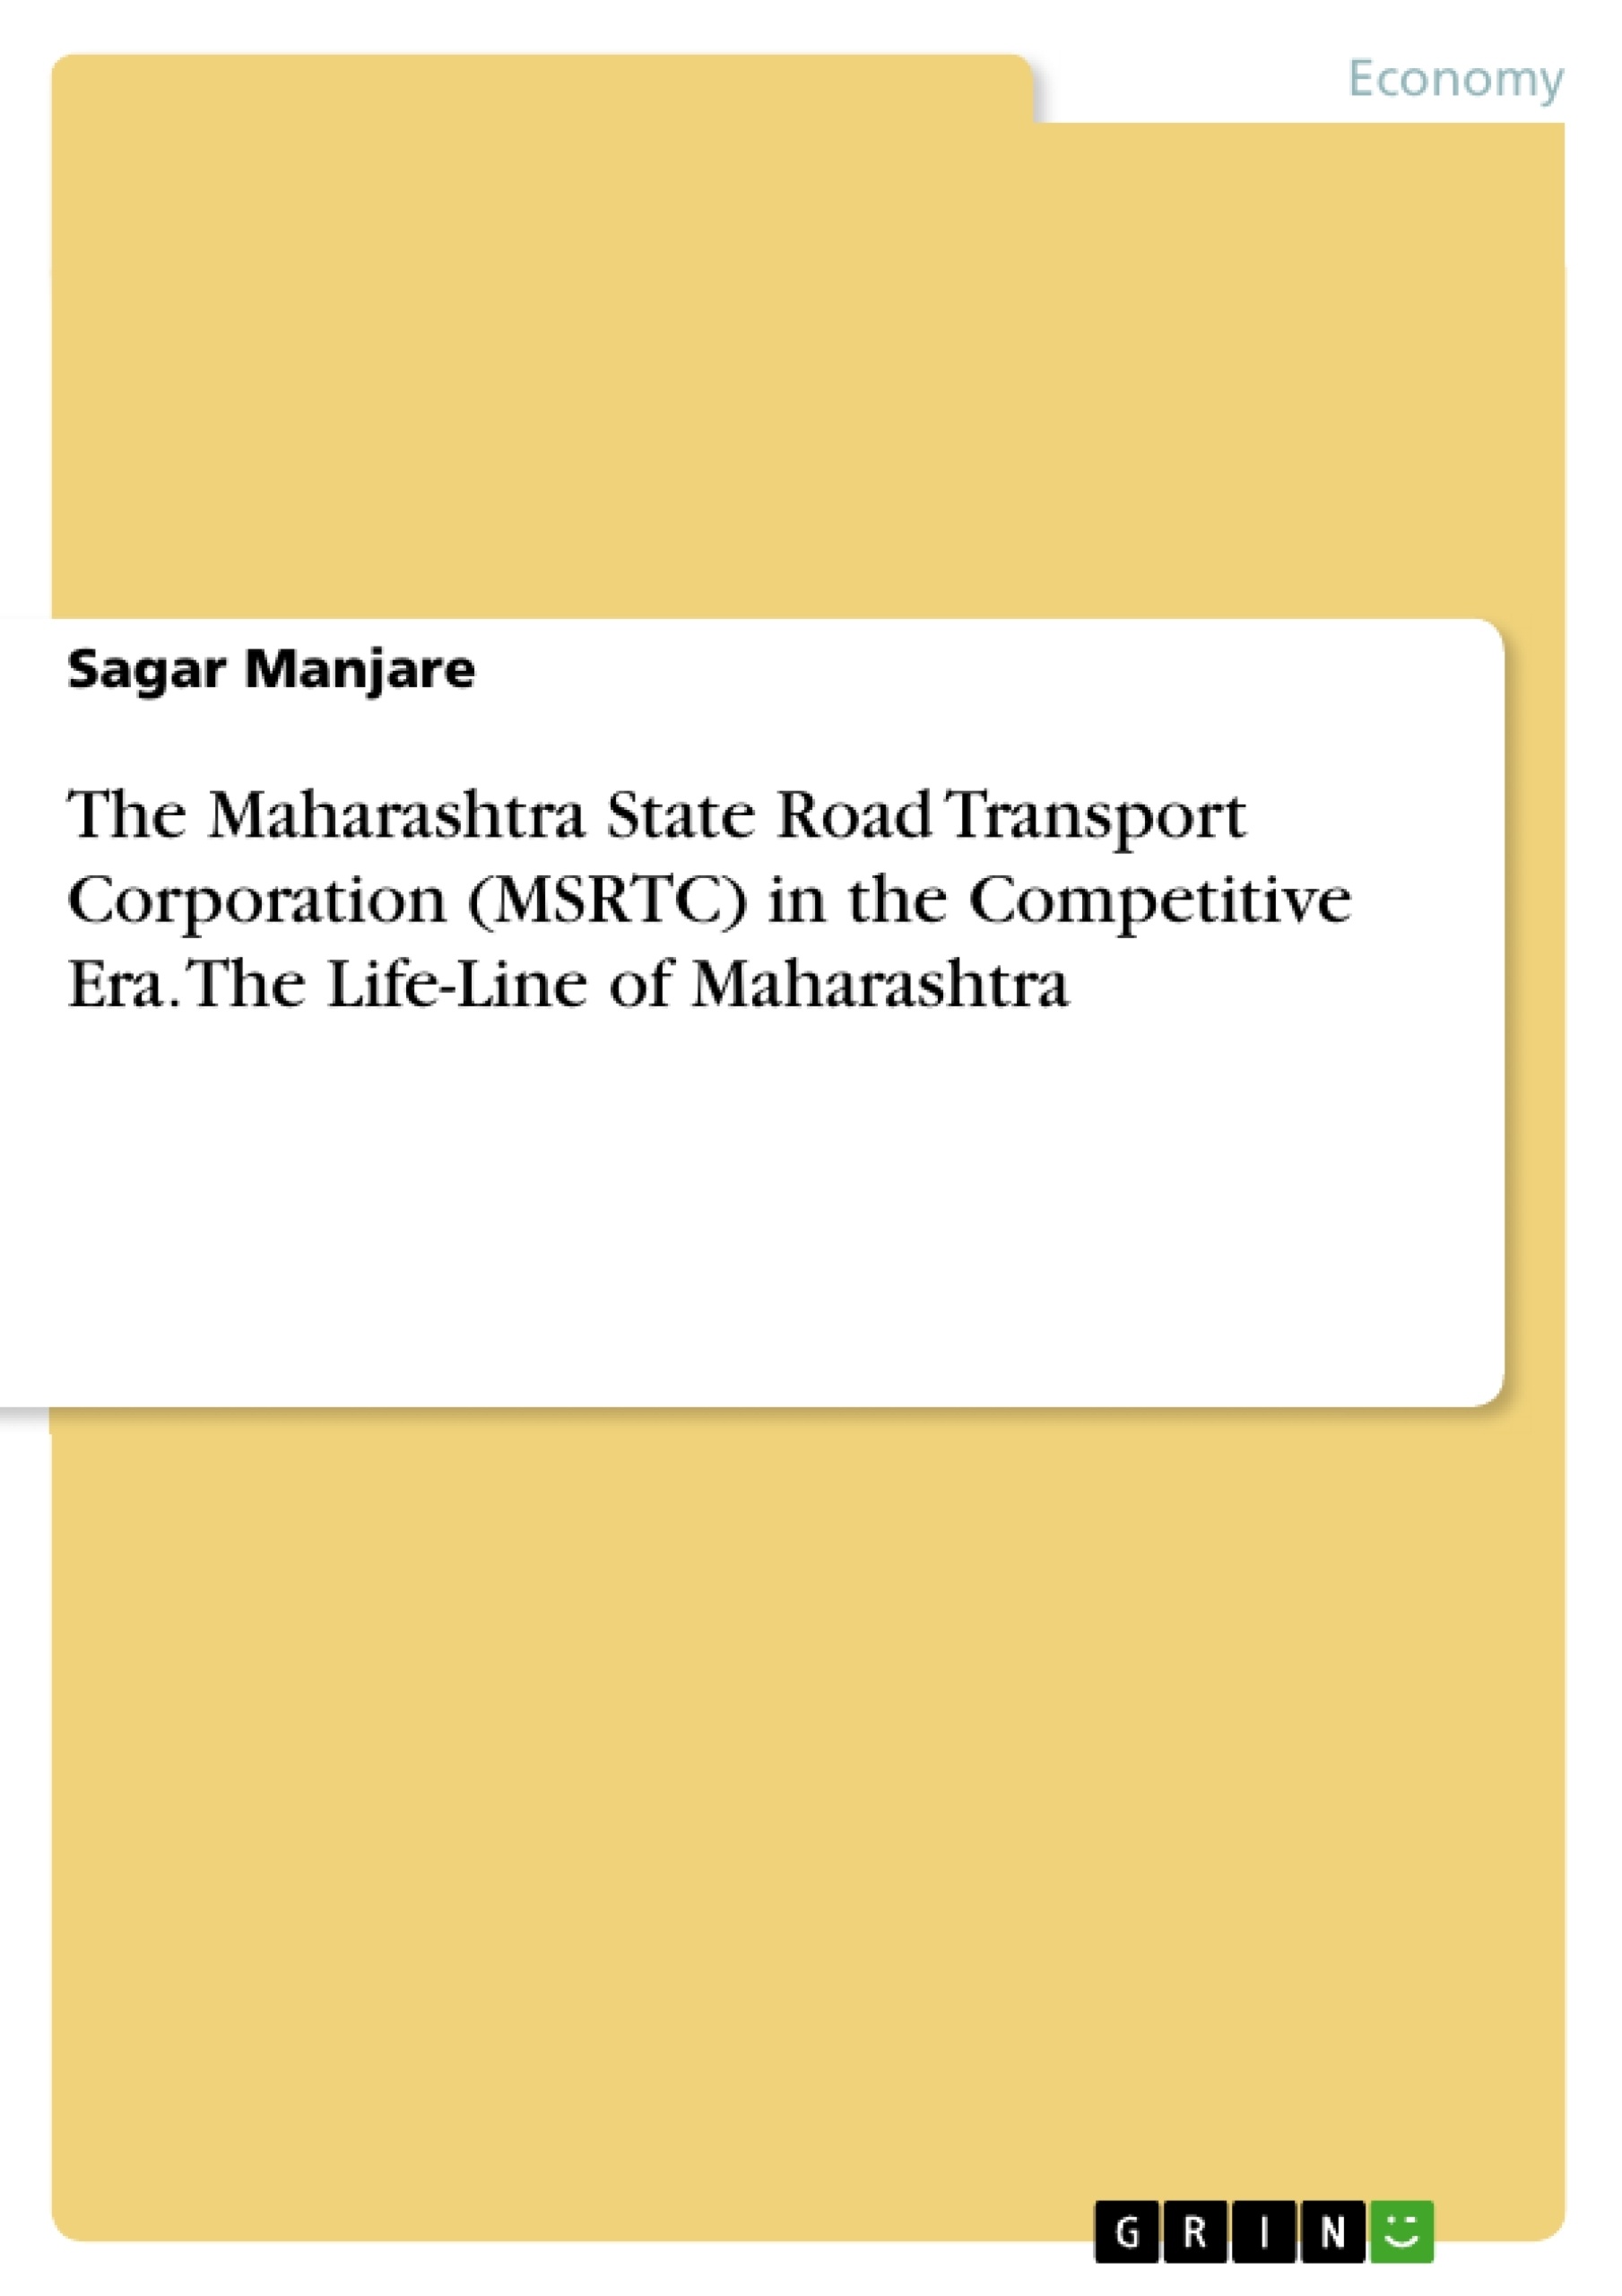 Title: The Maharashtra State Road Transport Corporation (MSRTC) in the Competitive Era. The Life-Line of Maharashtra